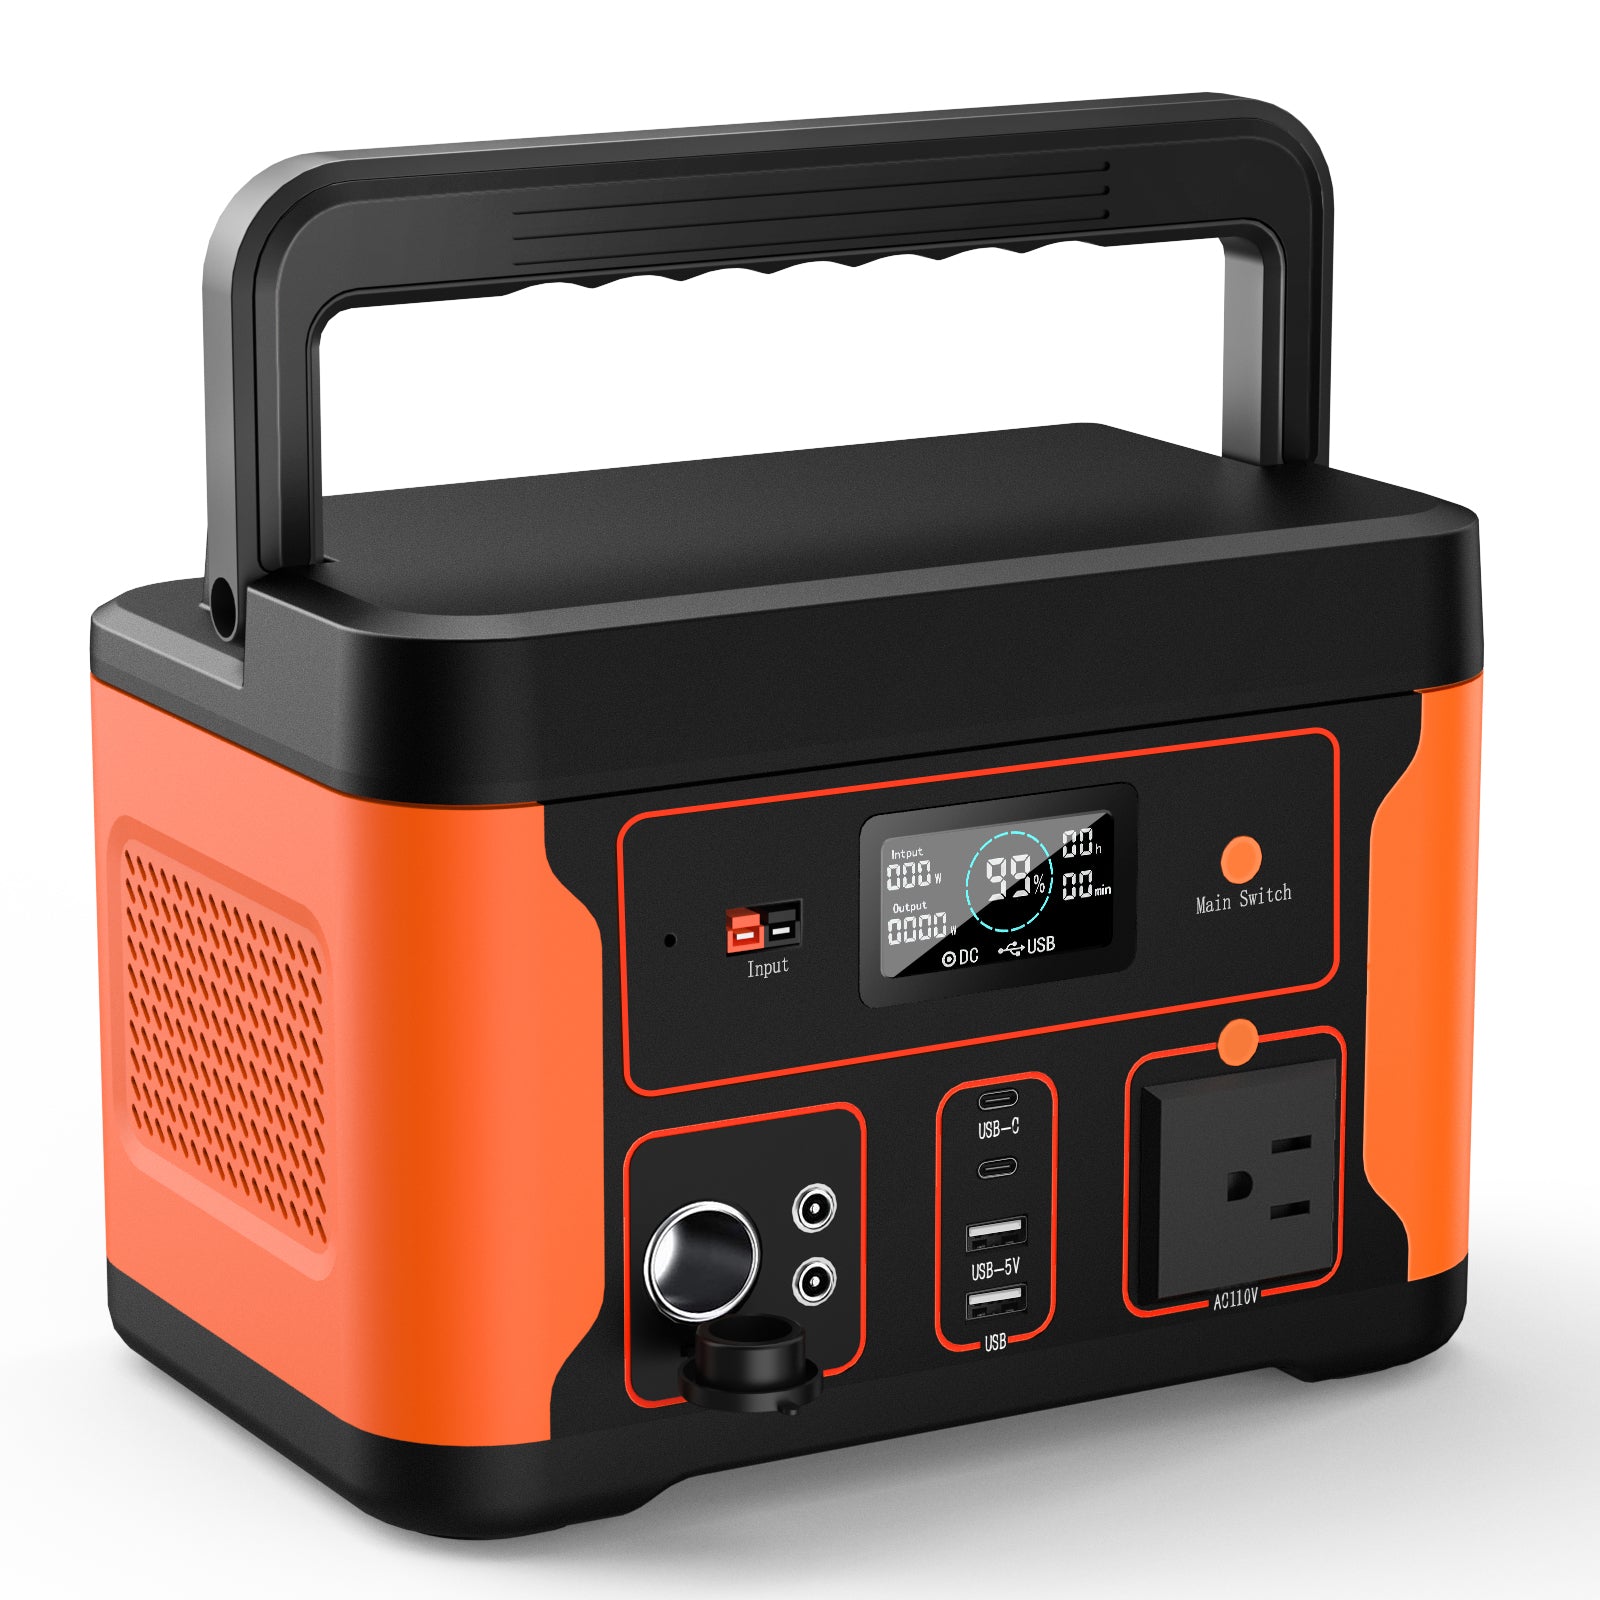 Tiexei power , 512WH Battery, 160000mAh Battery , LiFePO4 Battery, 600W Power , 600W Battery, Battery 600W , Power 600W， 1200W Power, Power 1200W ，fast charging Battery， mobile power, portable power station, home generator , generator ， power station outdoor, power station , LiFePO4, home backup power , Portable Power Station 600W, 512Wh Generator